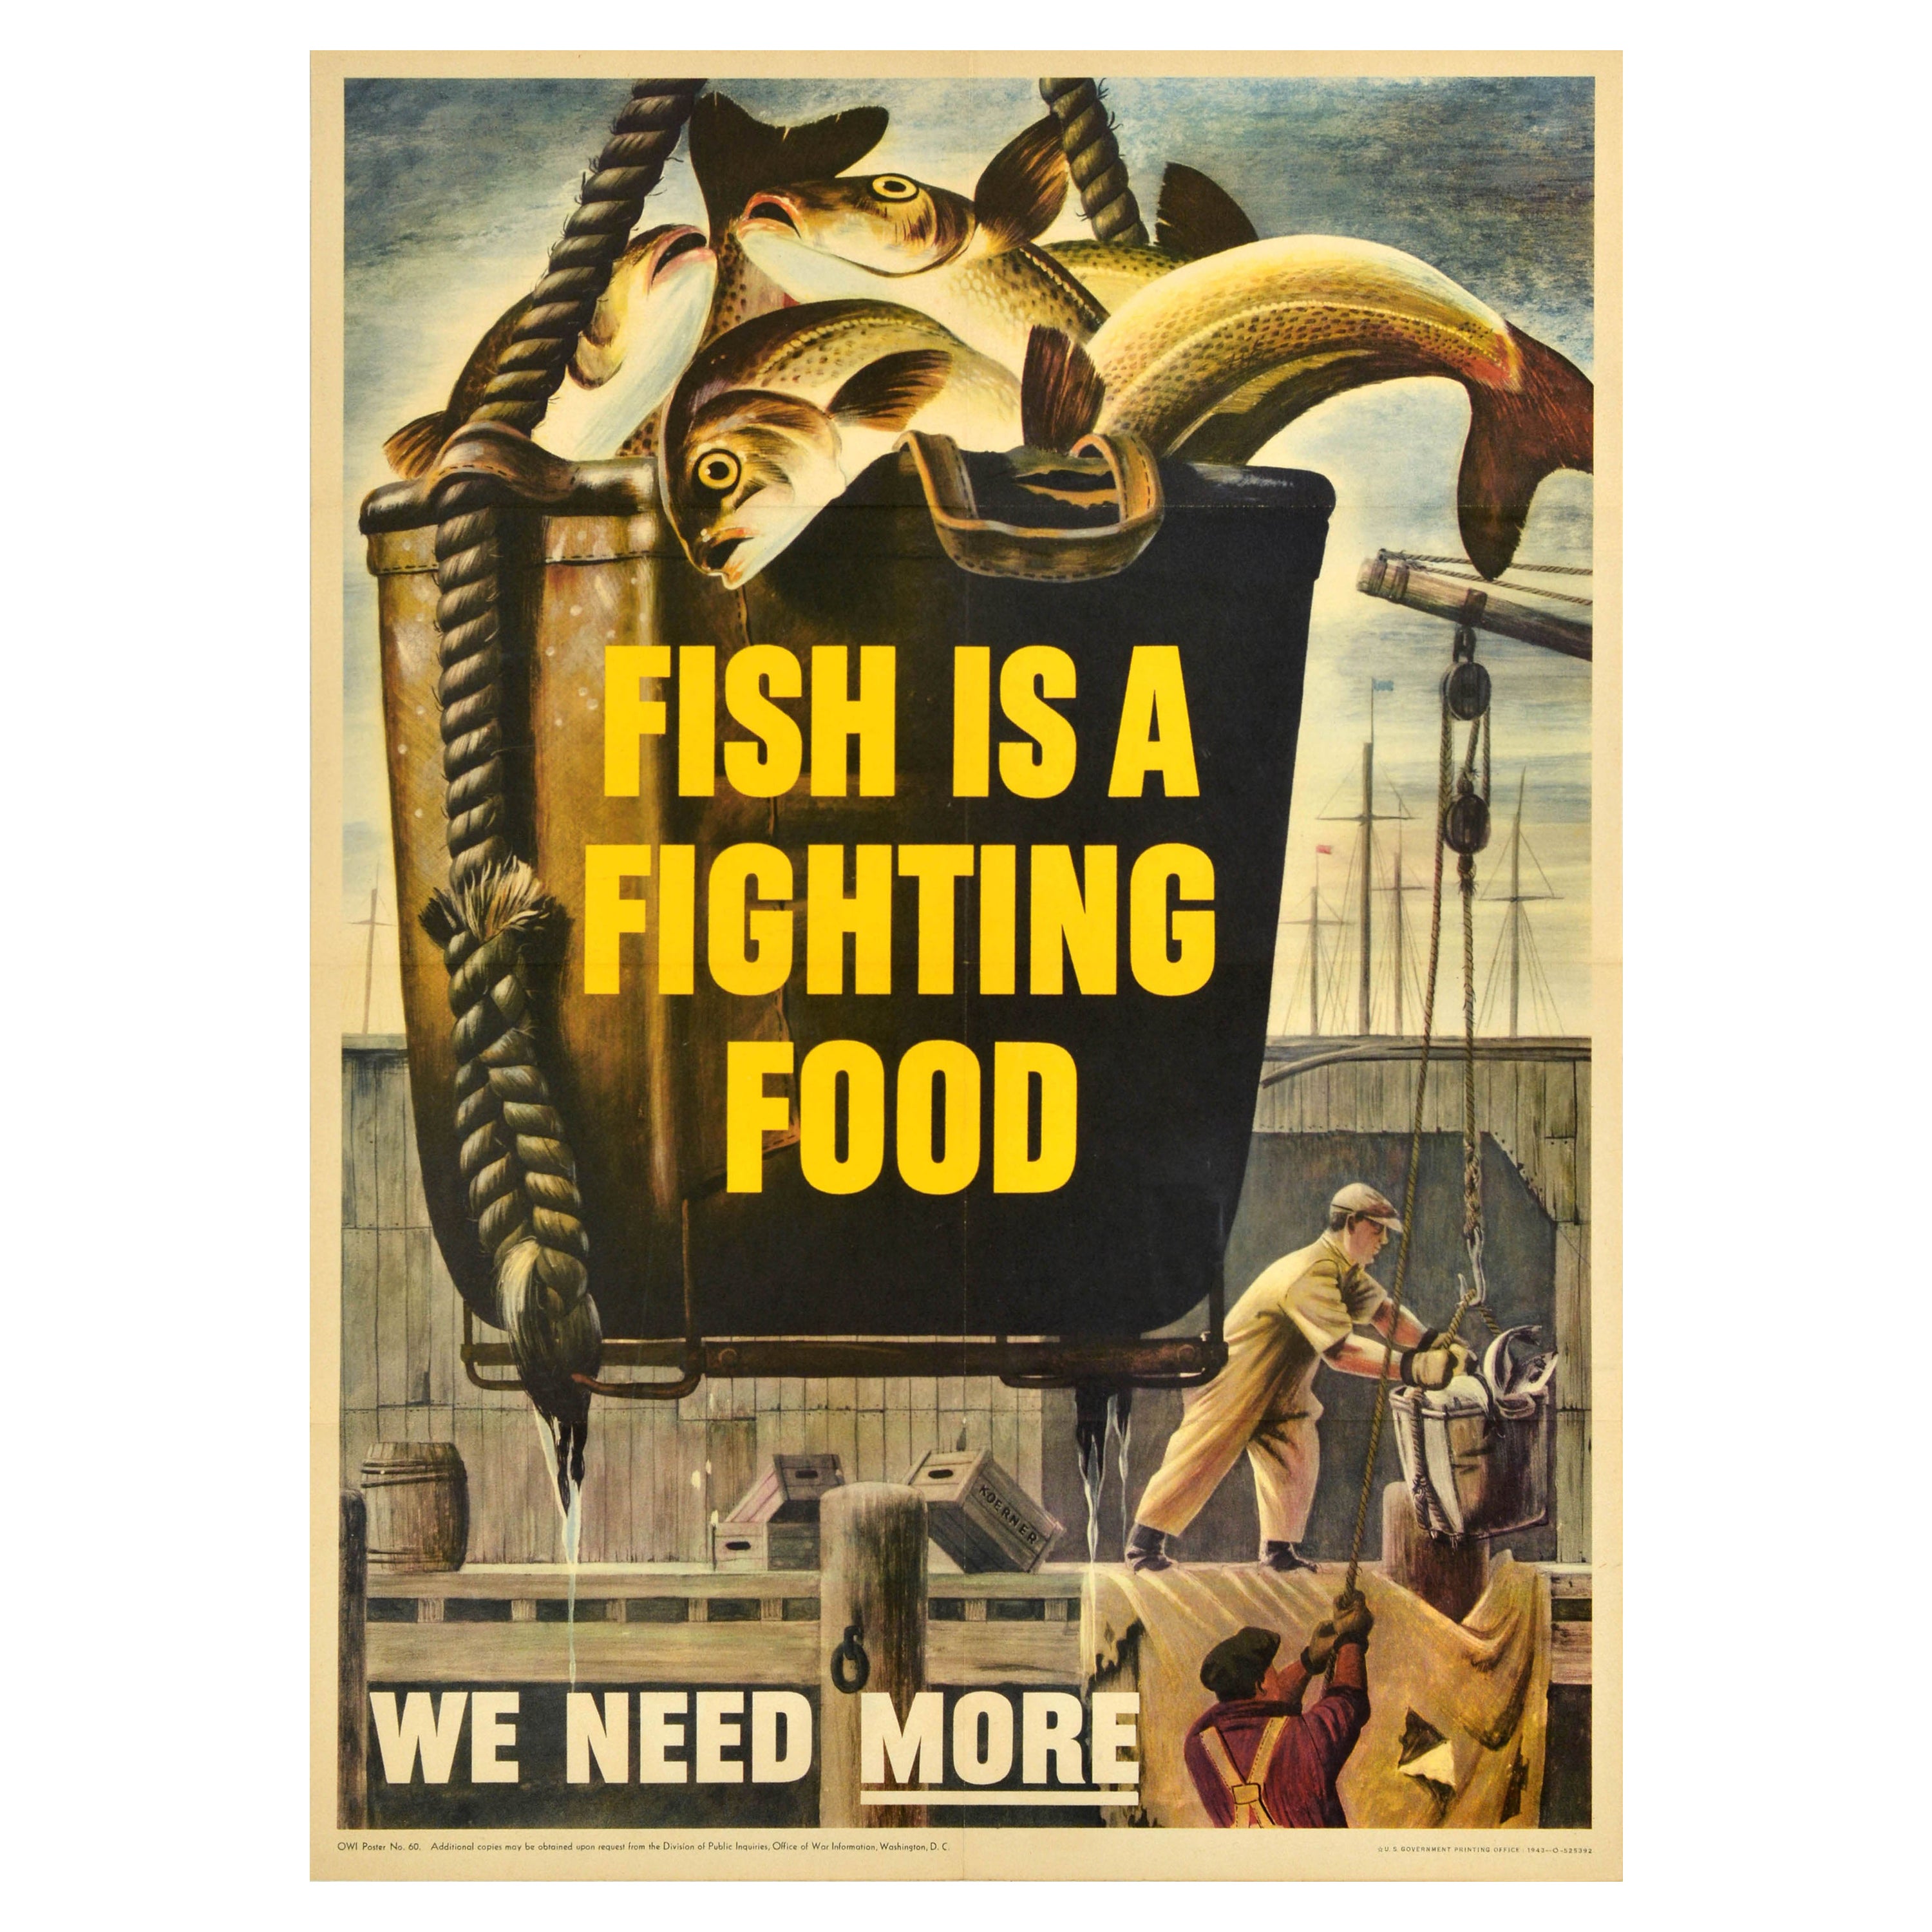 Original Vintage War Home Front Poster Fish Is A Fighting Food Rationing WWII